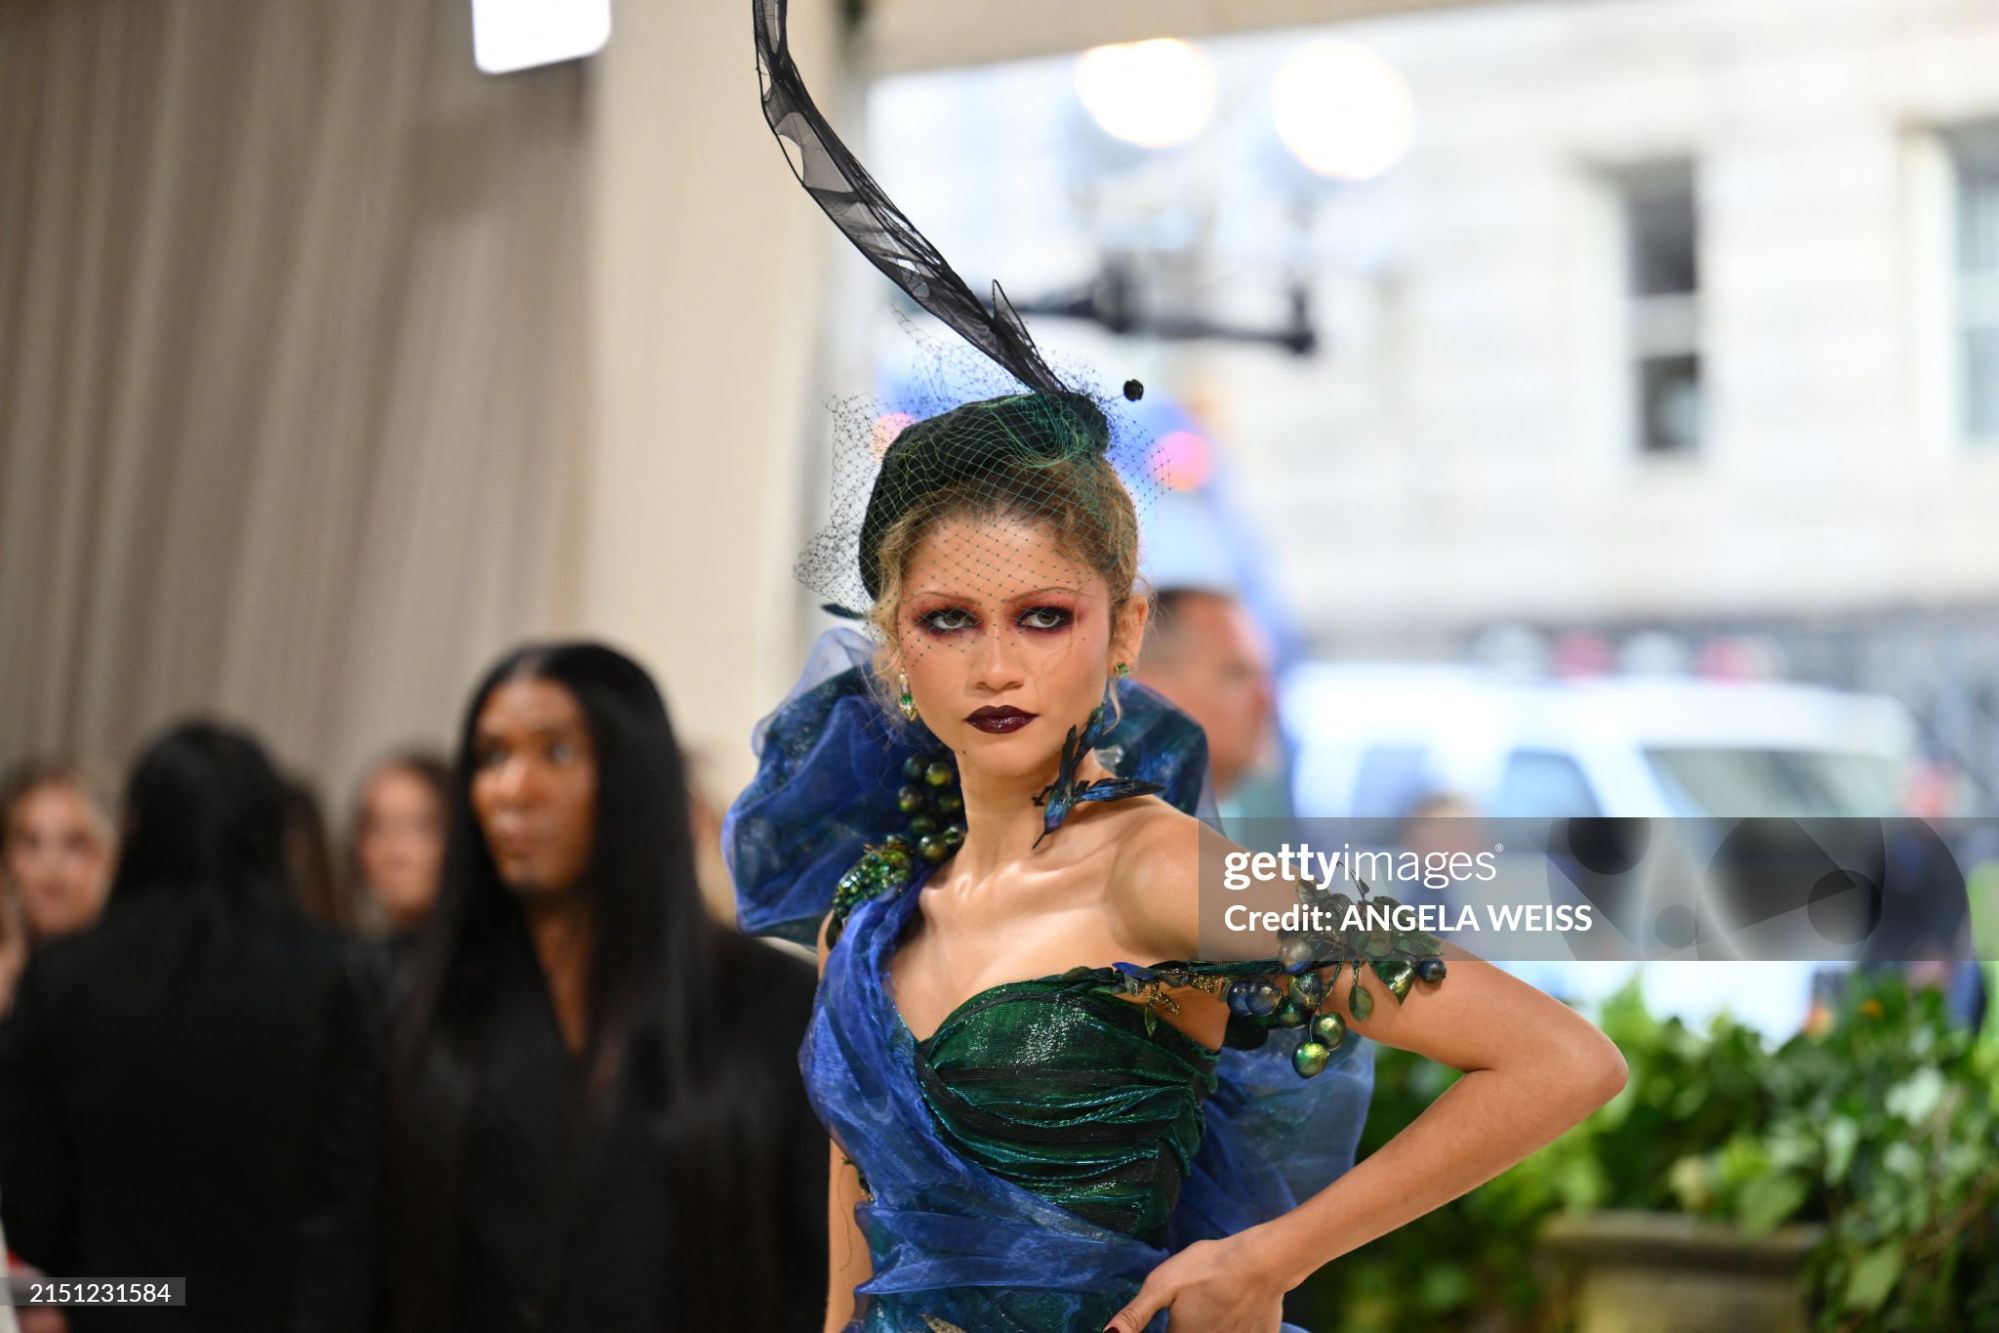 gettyimages-2151231584-2048x2048.jpg